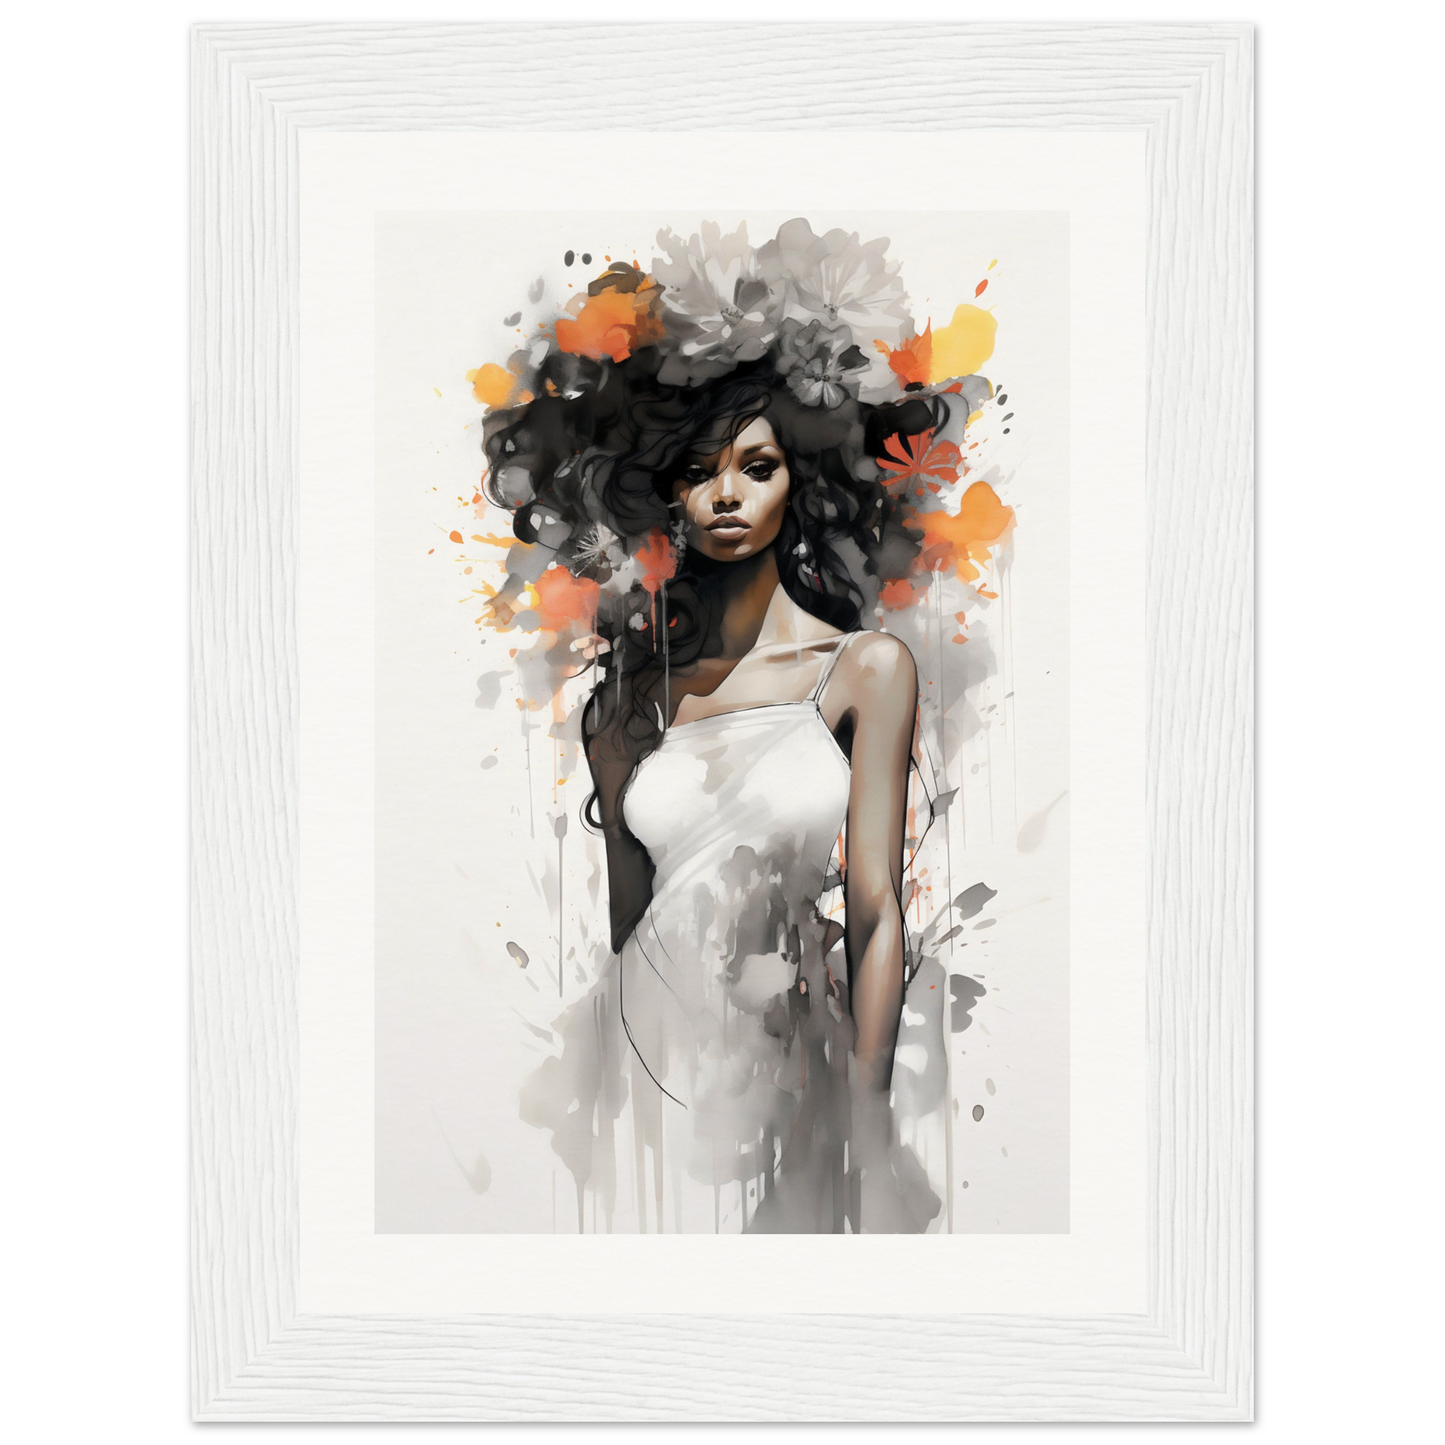 A high quality framed print of a woman with a flower in her hair is available as a Wild Whimsy The Oracle Windows™ Collection art poster.